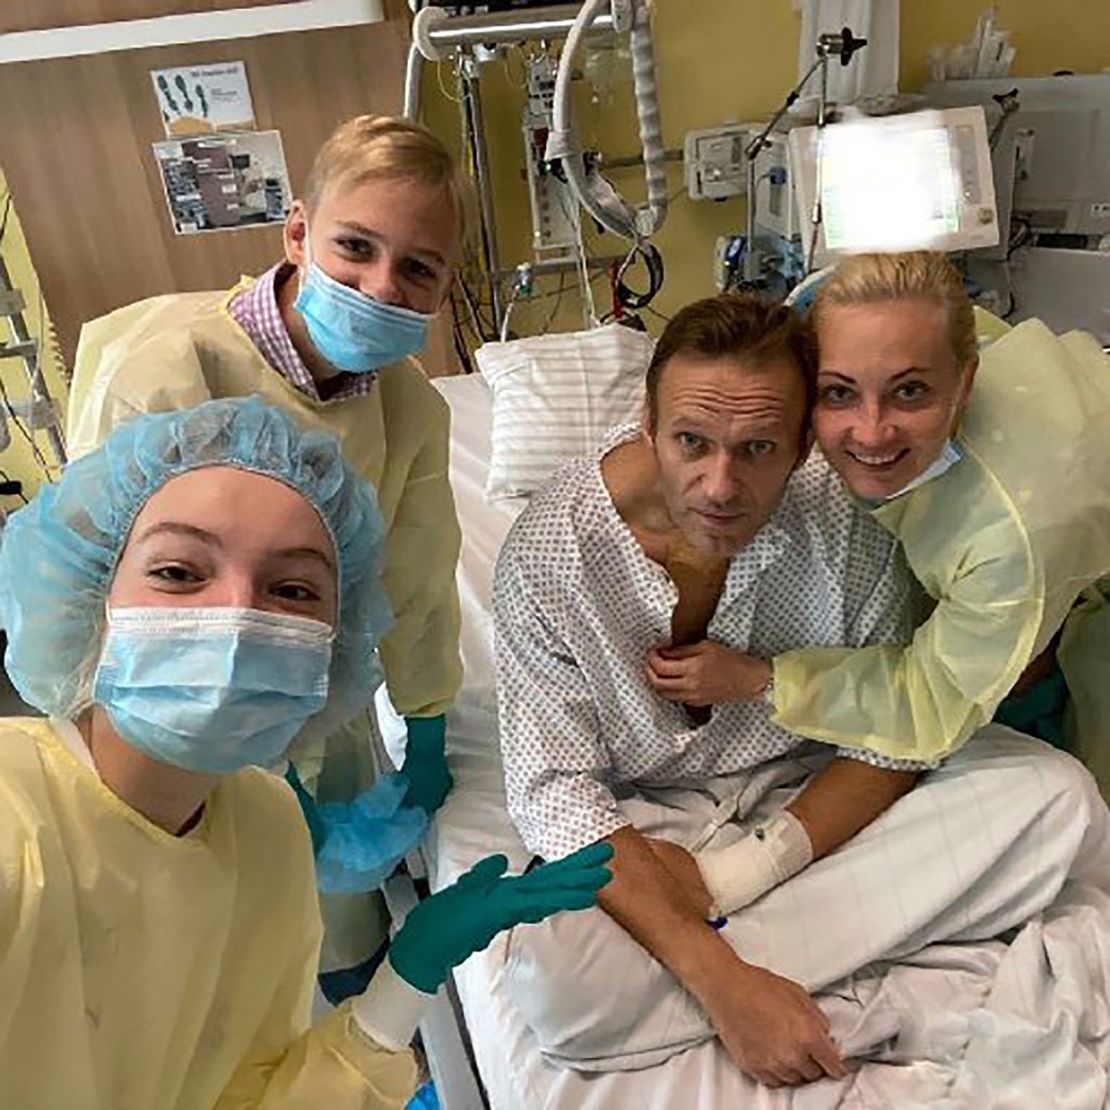 Alexey Navalny shares a first picture of himself post-attack, from a hospital in Berlin, Germany, on Tuesday, September 15.